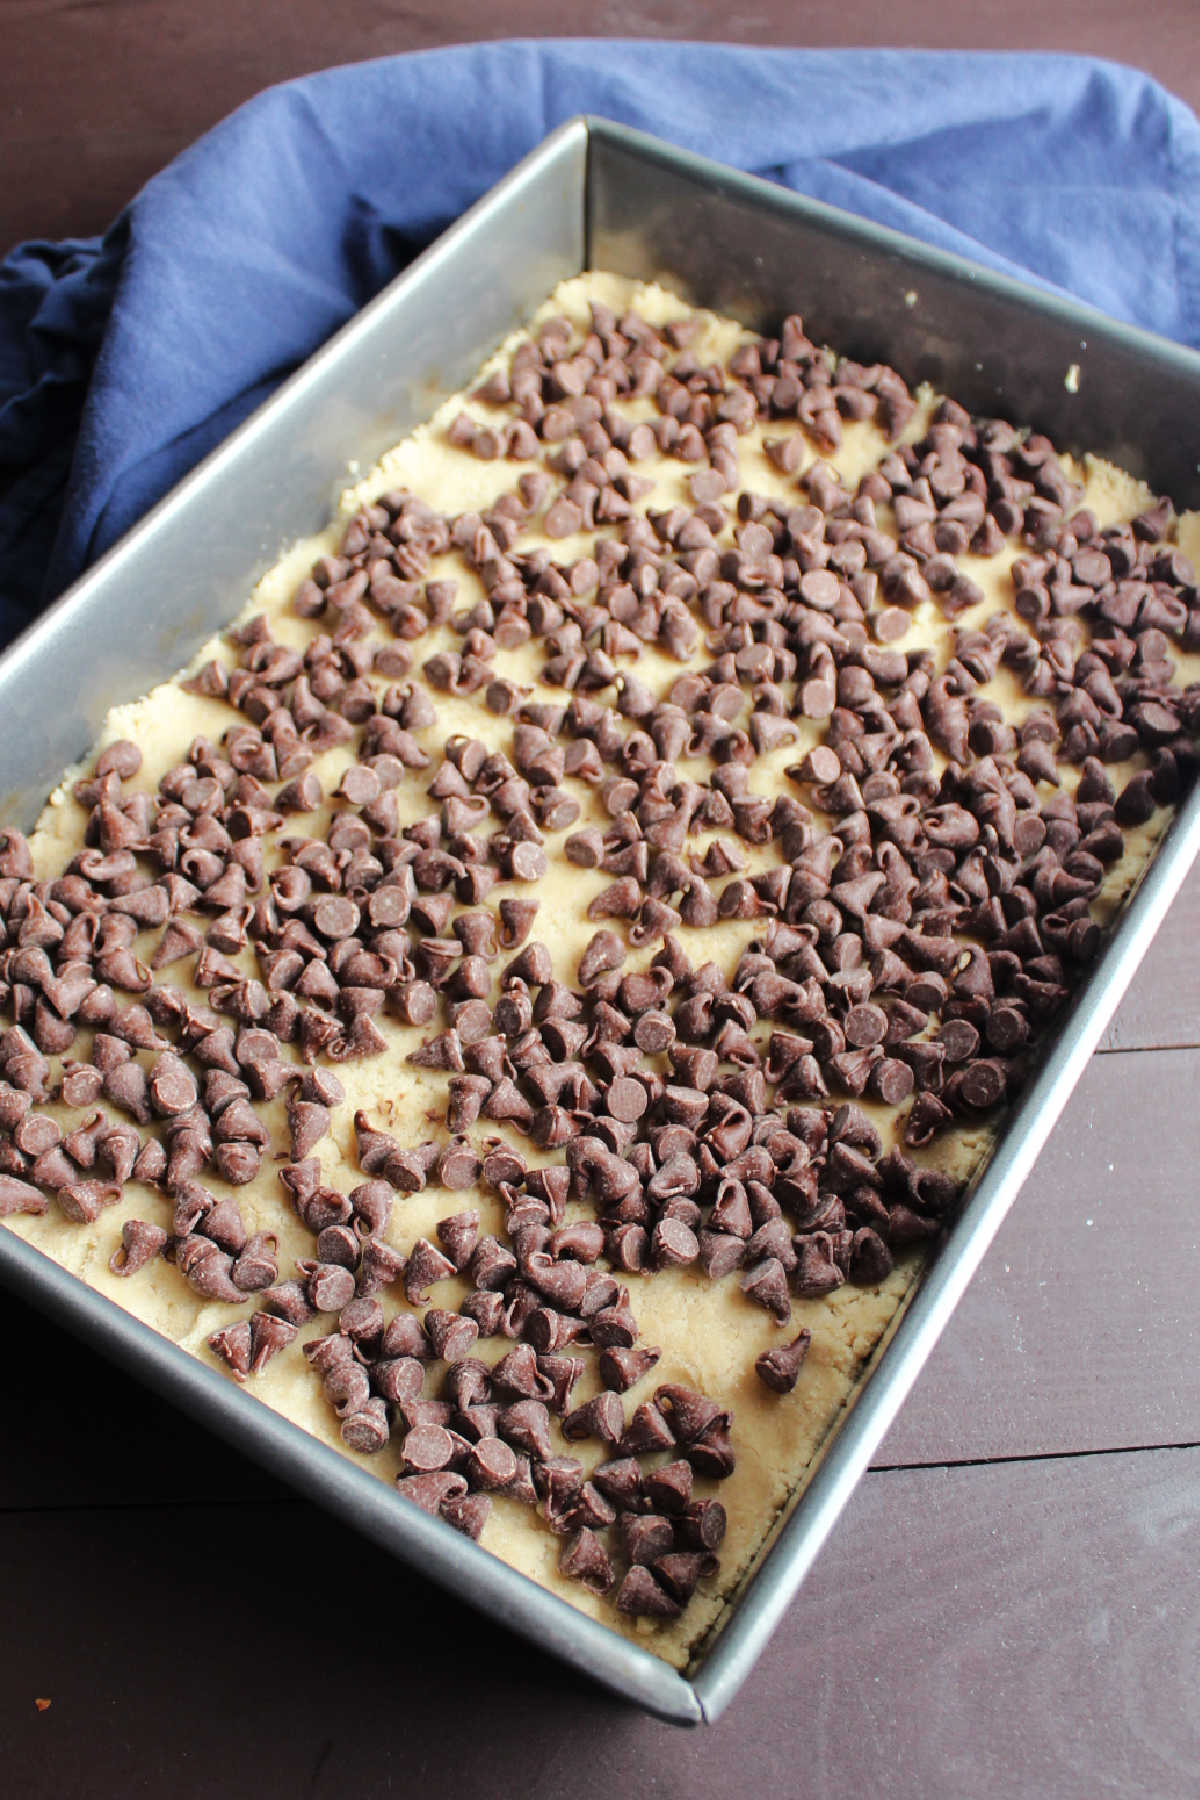 Cookie dough pressed into 9x13 inch pan and topped with chocolate chips.